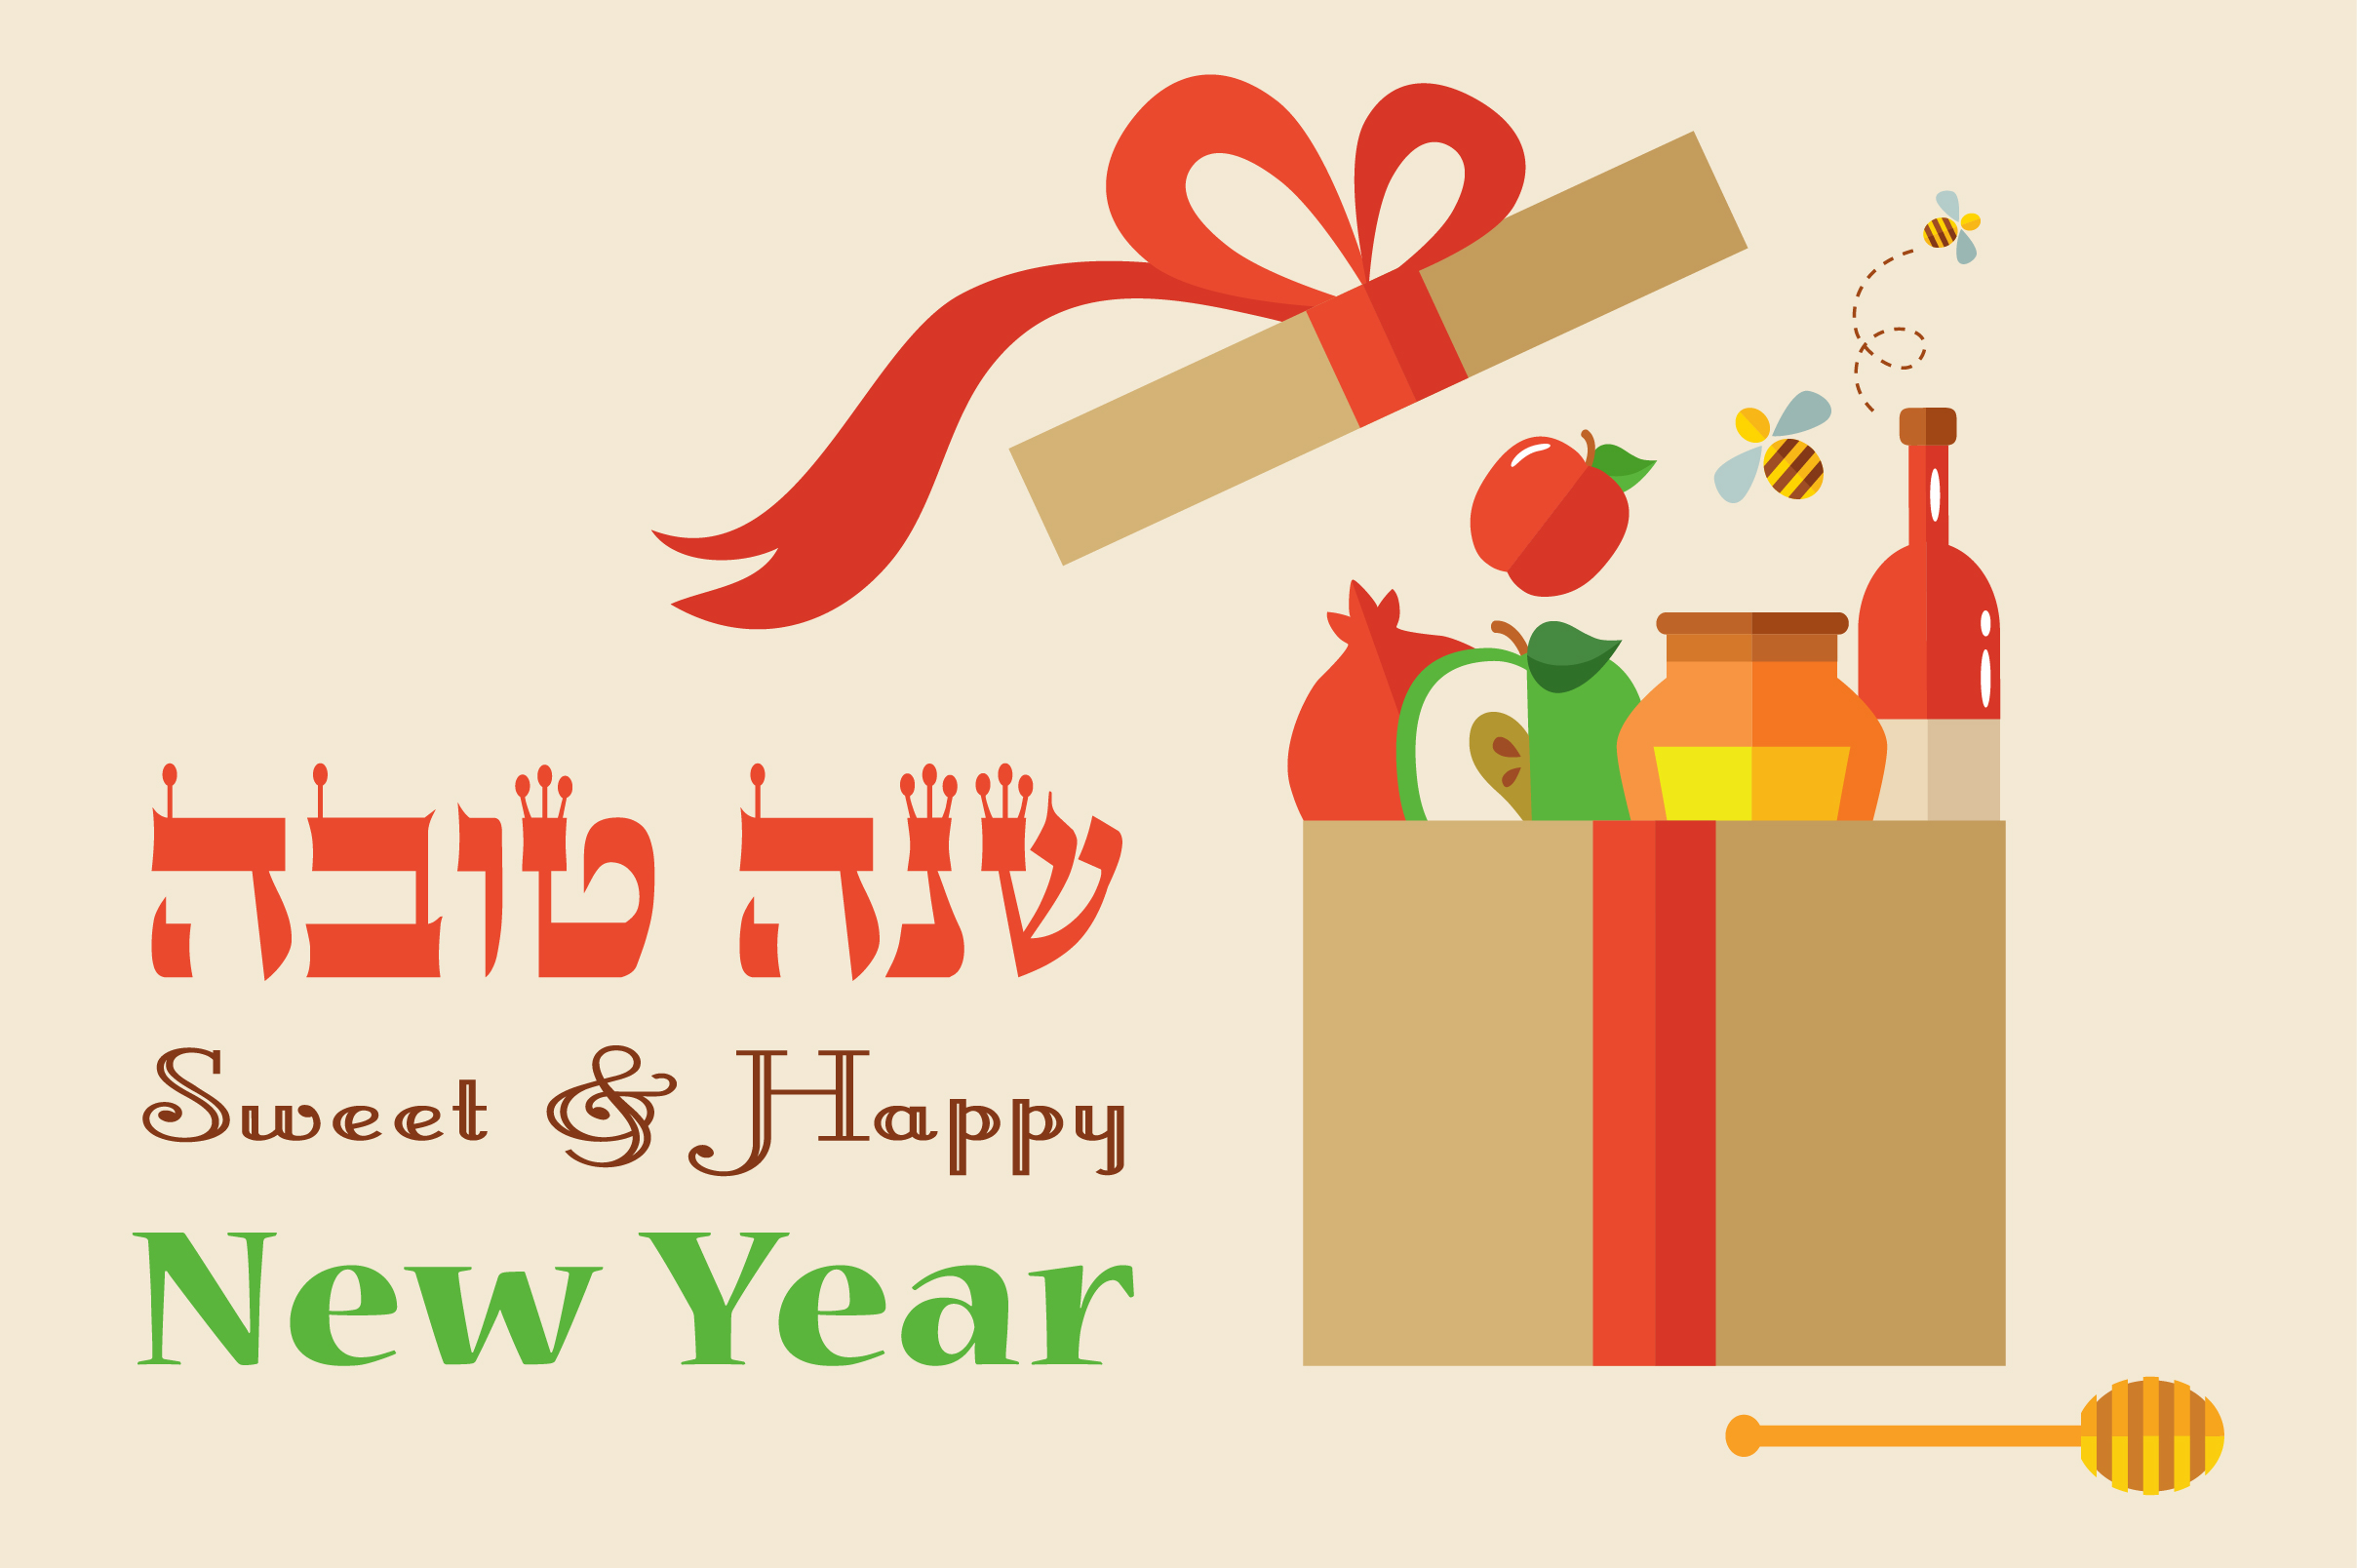 Greeting cards For Jewish New Year2 Illustrations on Creative Market